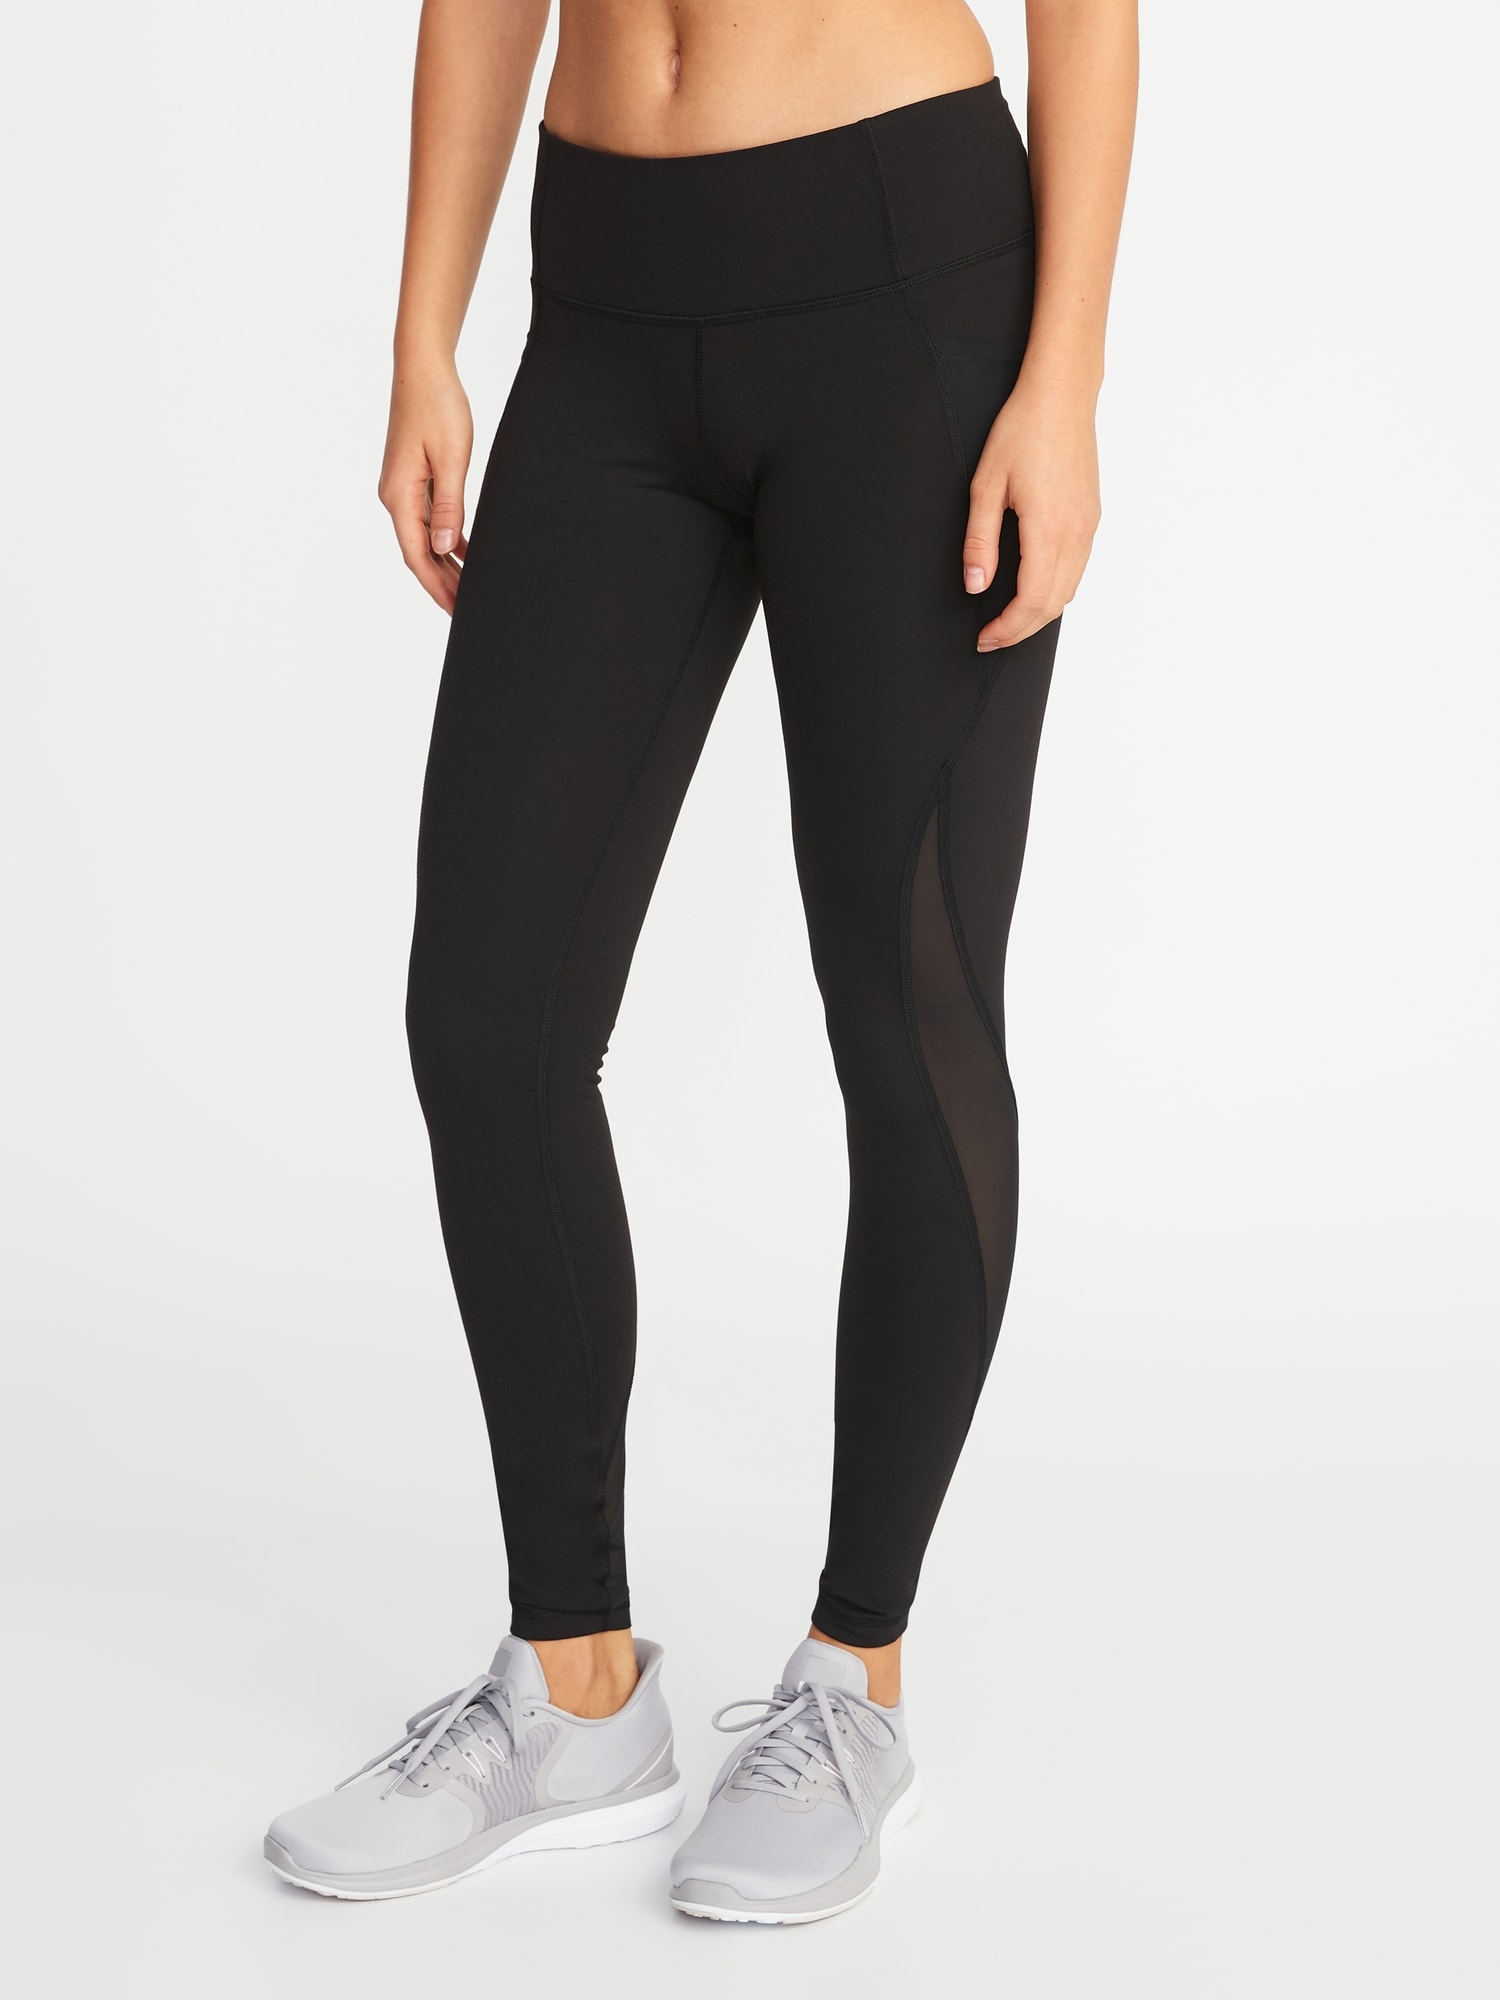 OLD NAVY ACTIVE Elevate Leggings Go Dry Medium Compression Mid Rise Large  NWT $24.95 - PicClick